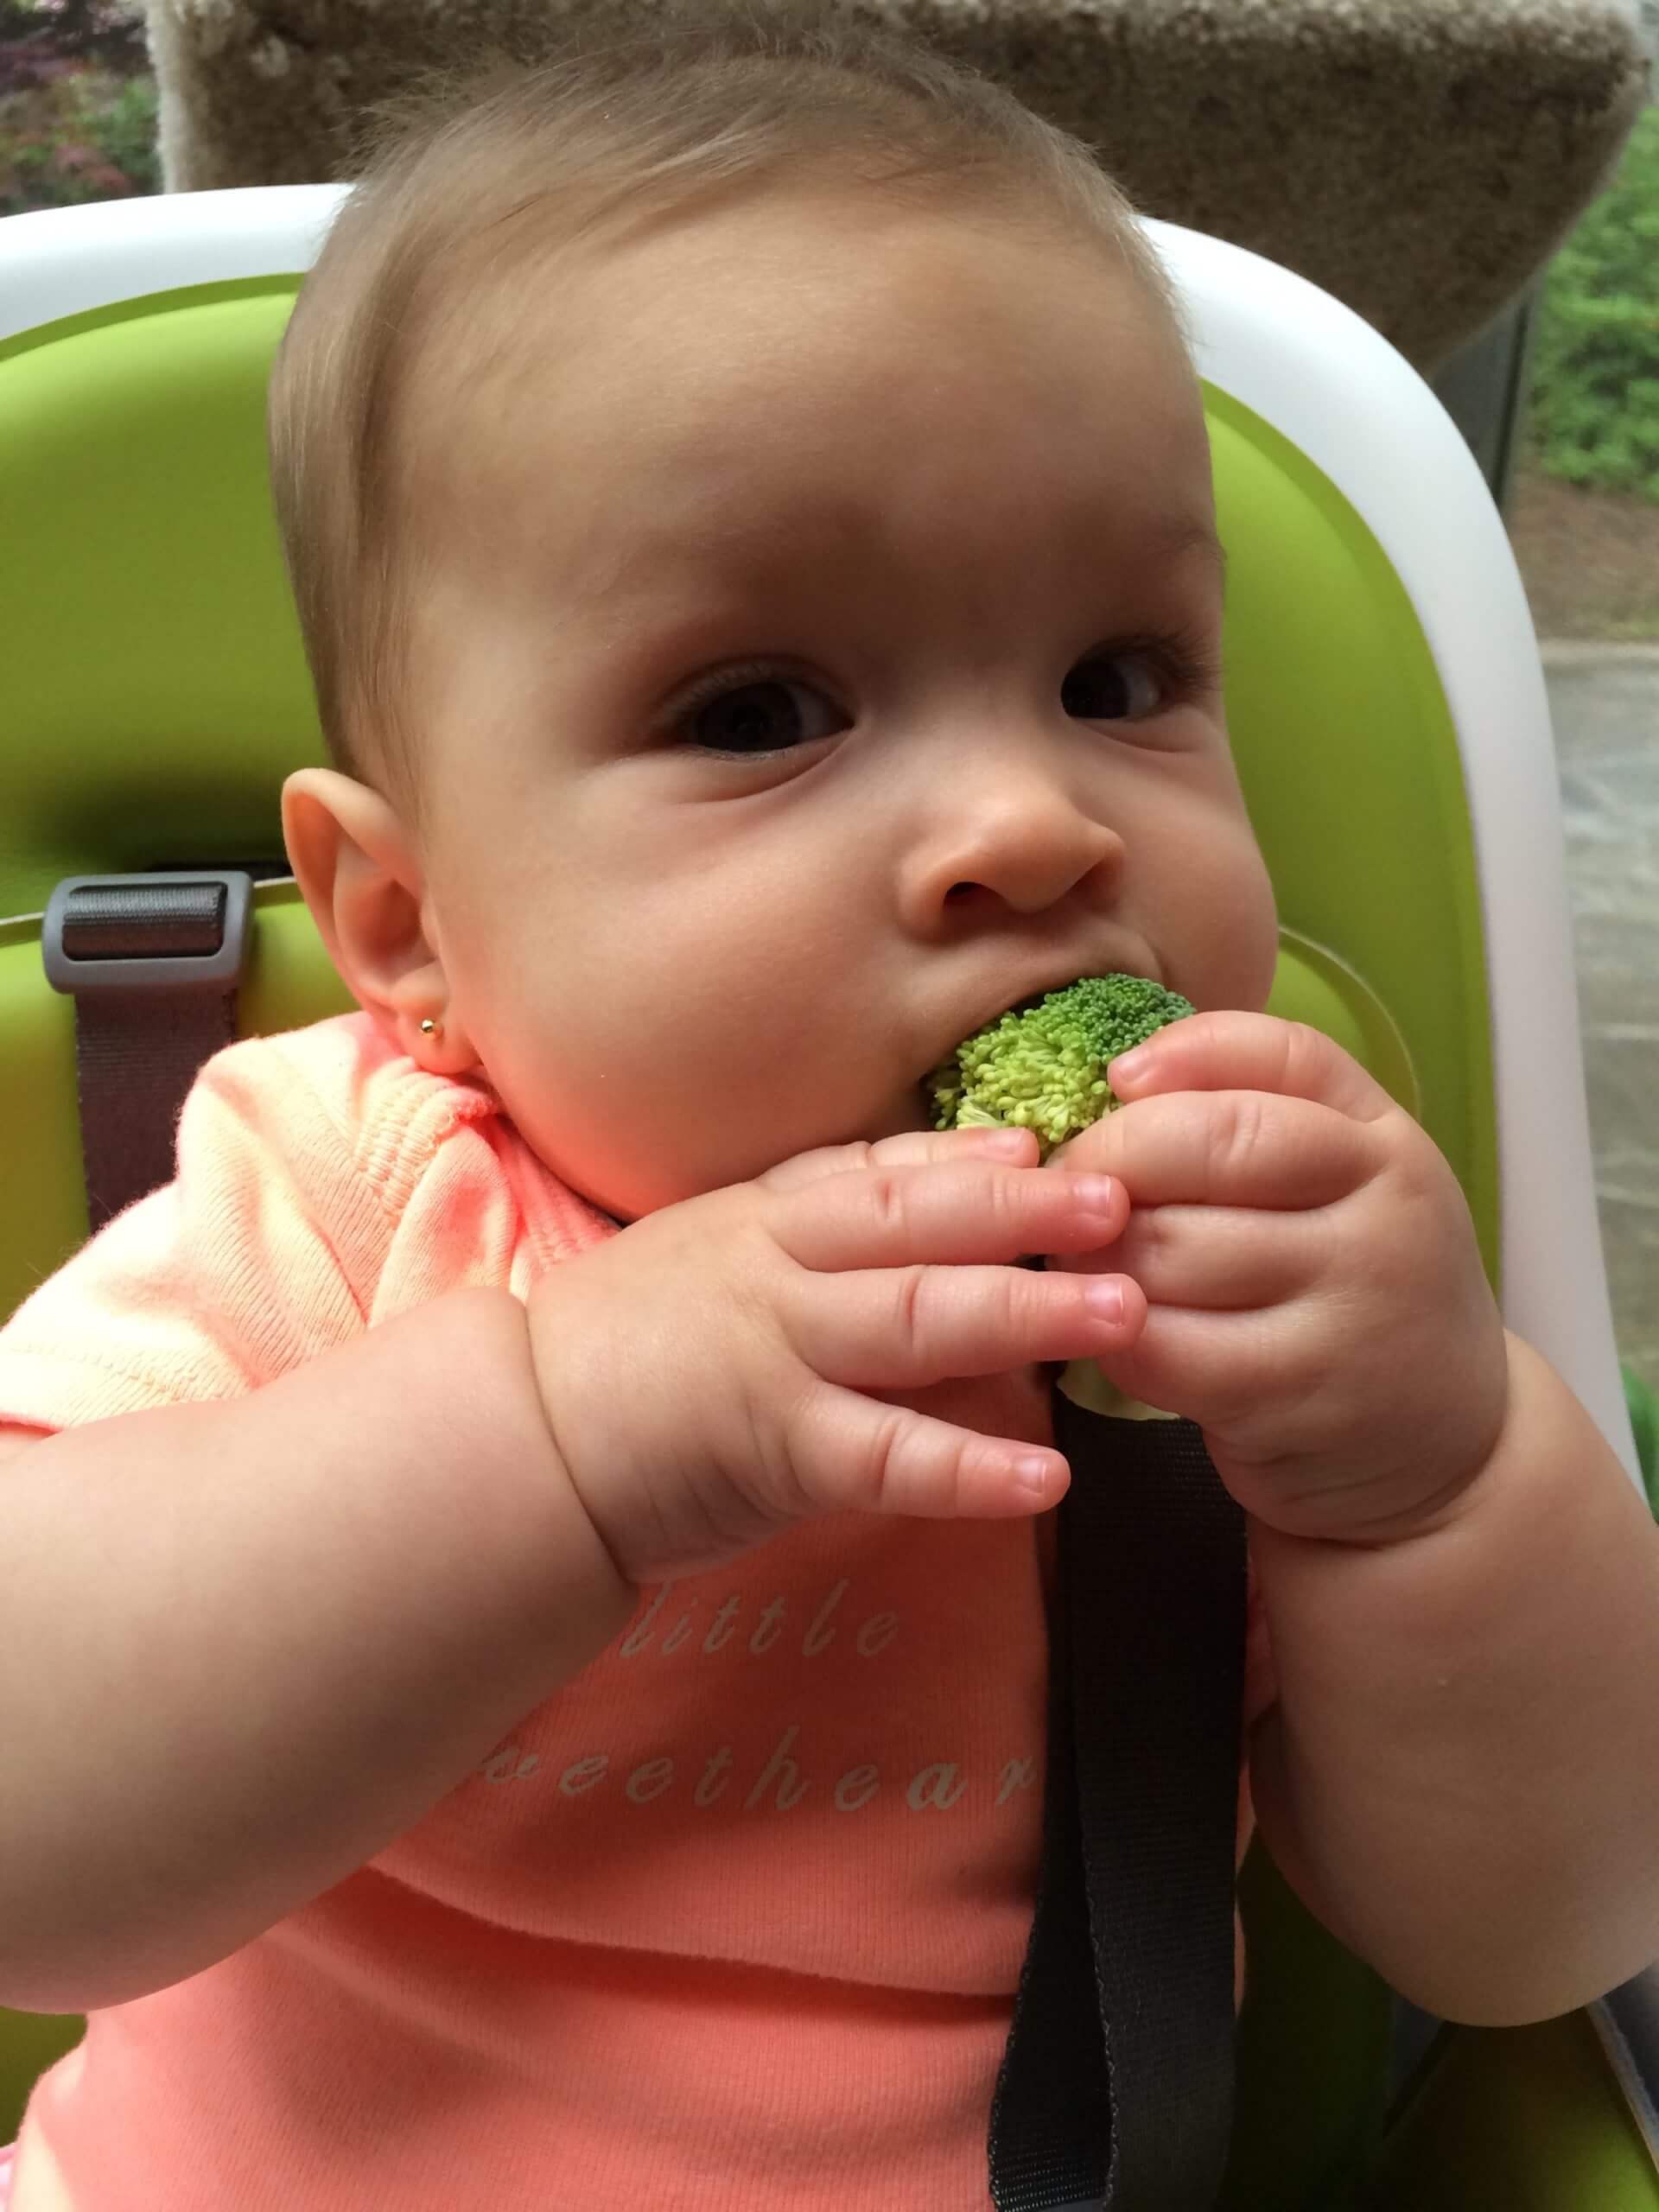 Michael's daughter Isabella eating broccoli for the first time.